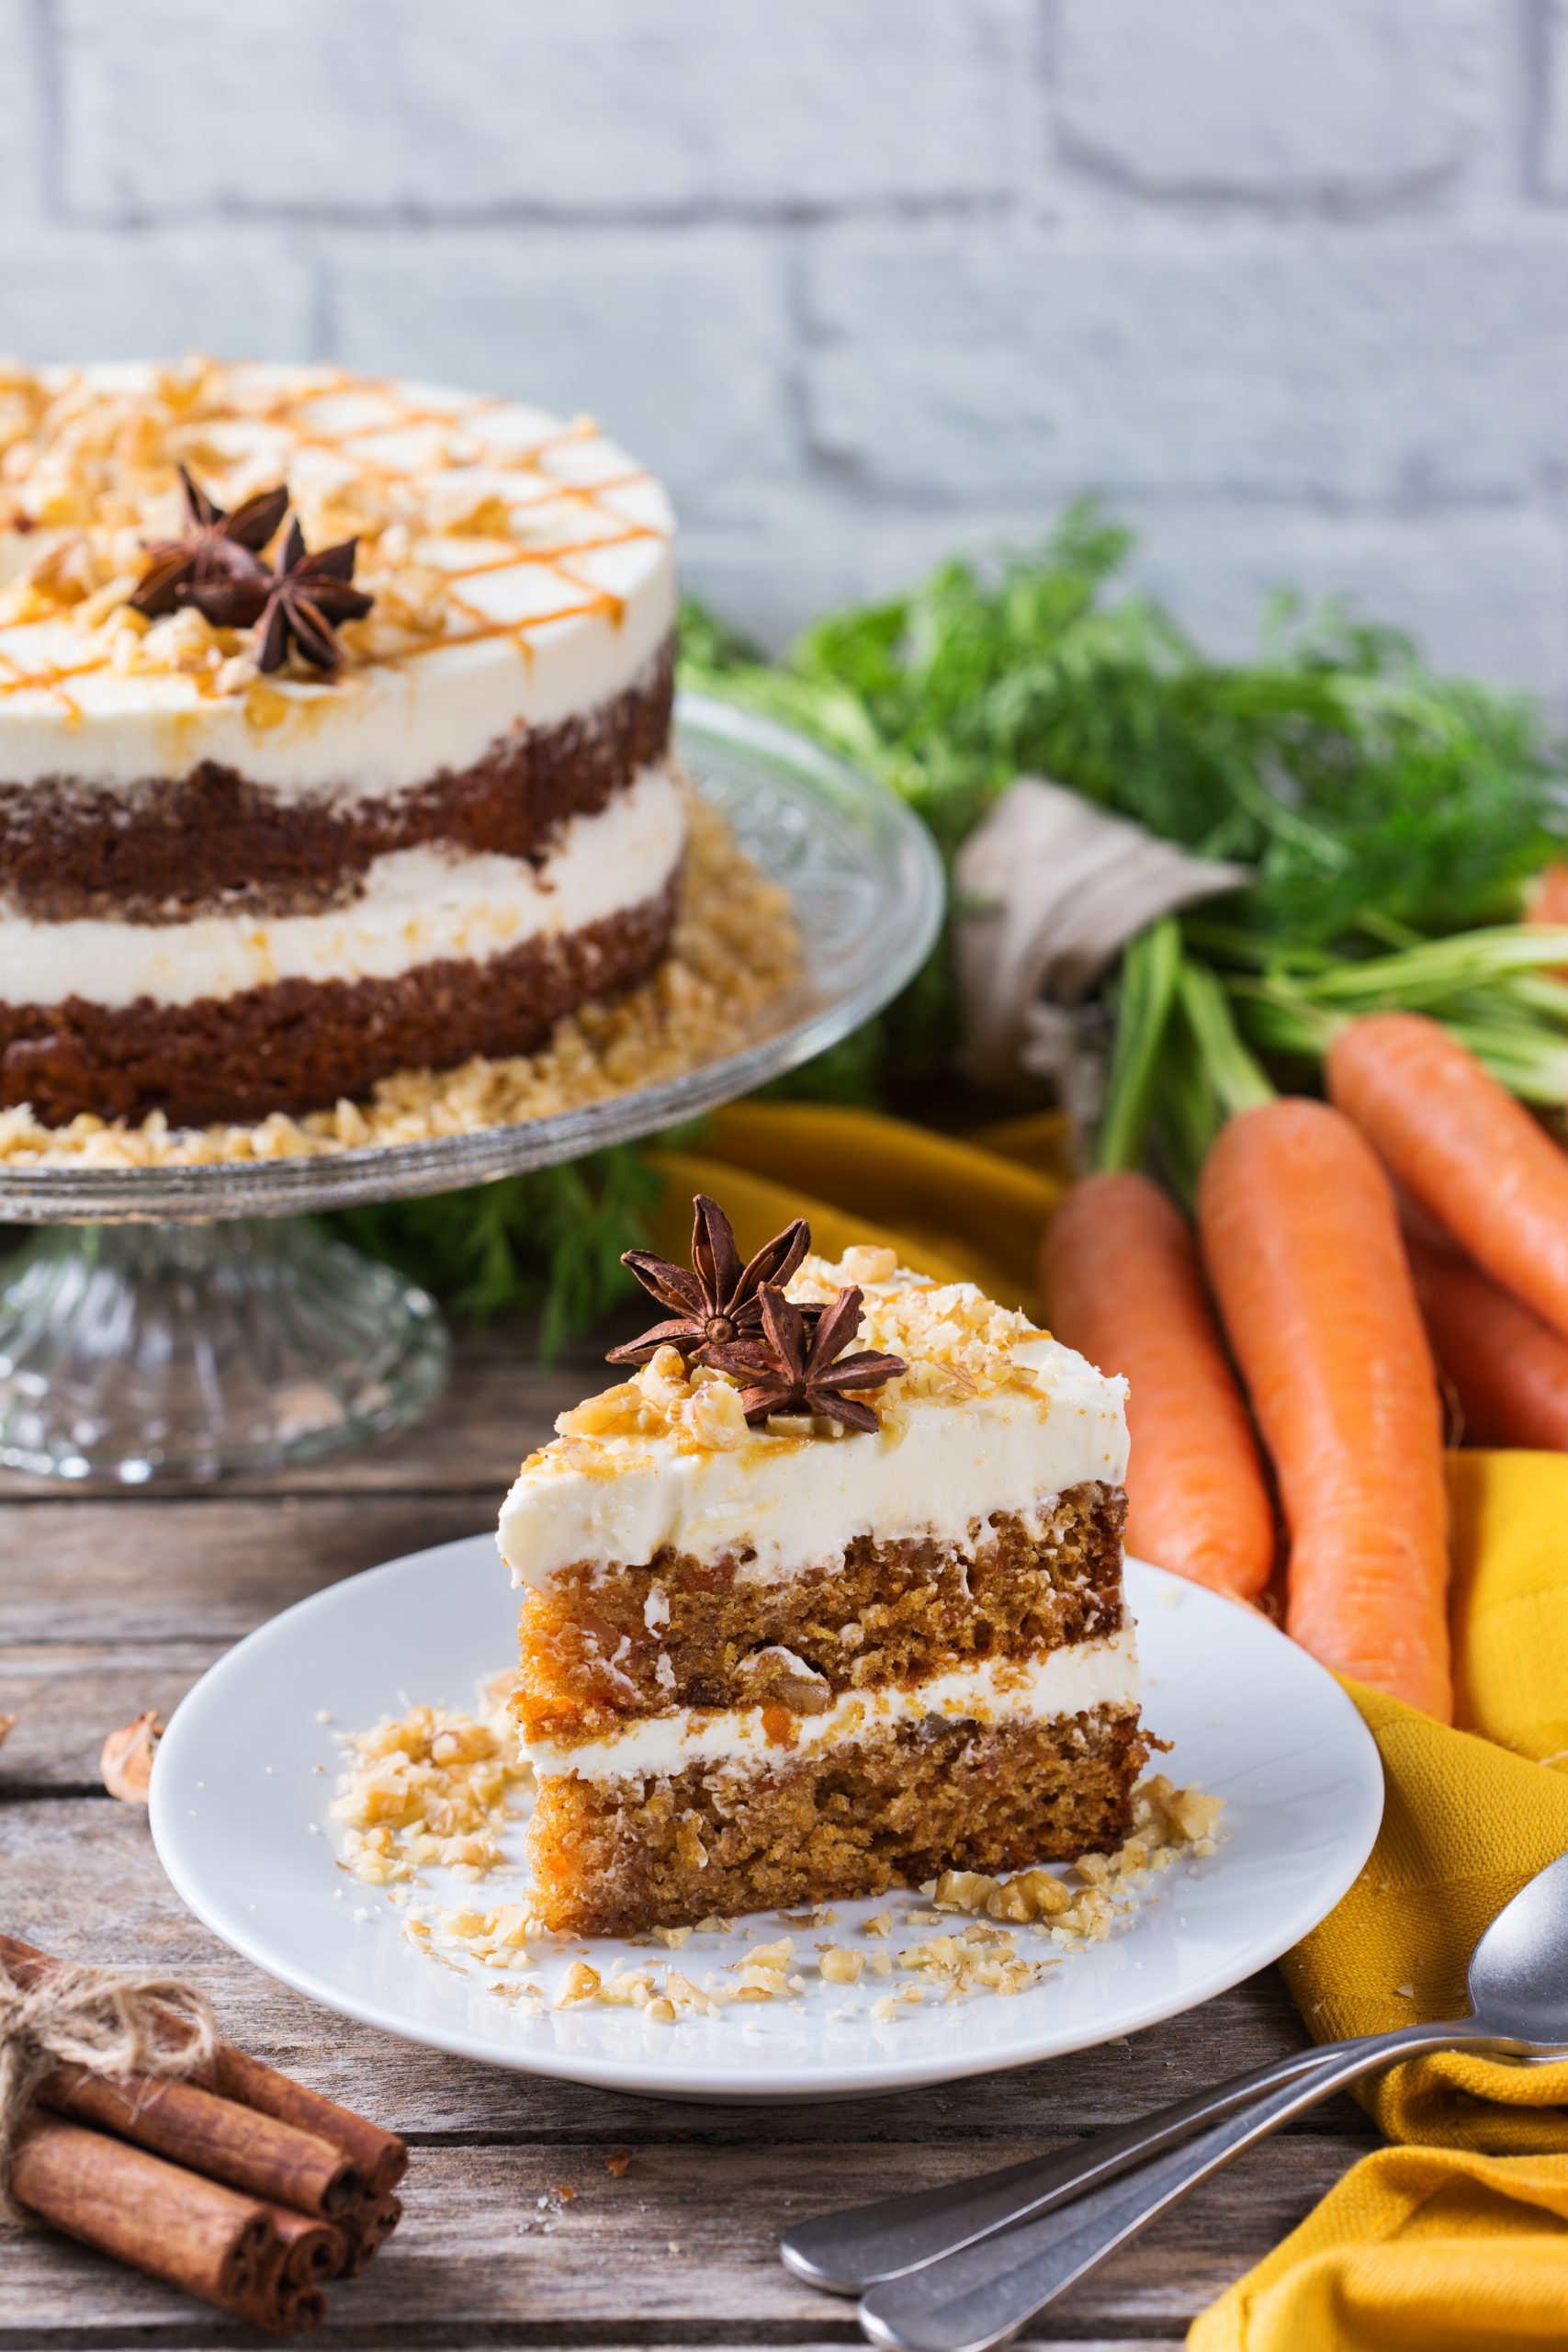 bake-a-delicious-and-healthier-easter-treat-with-pirouette-muscovado-sugar-carrot-cakes